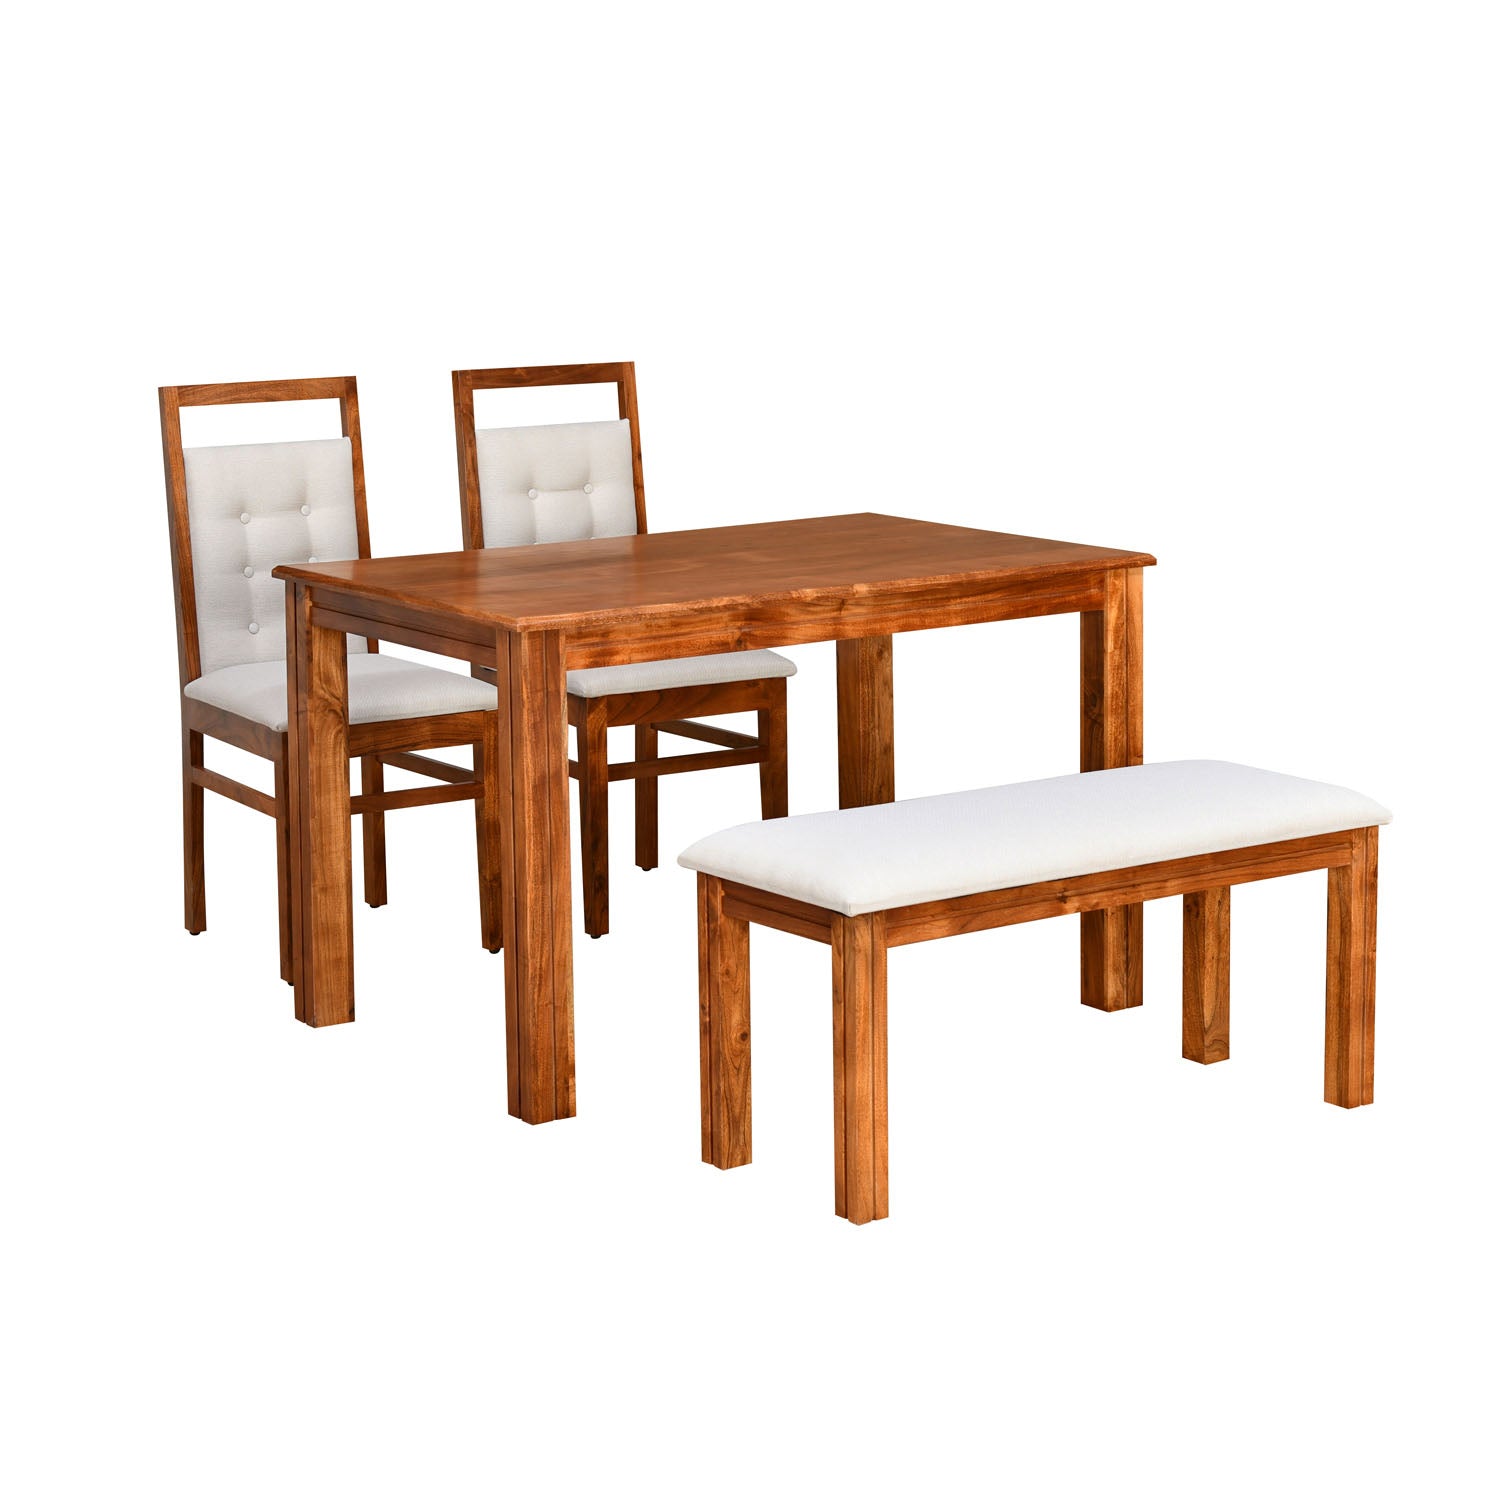 Vera 4 Seater Solid Wood Dining Set With Bench in Honey Brown Finish